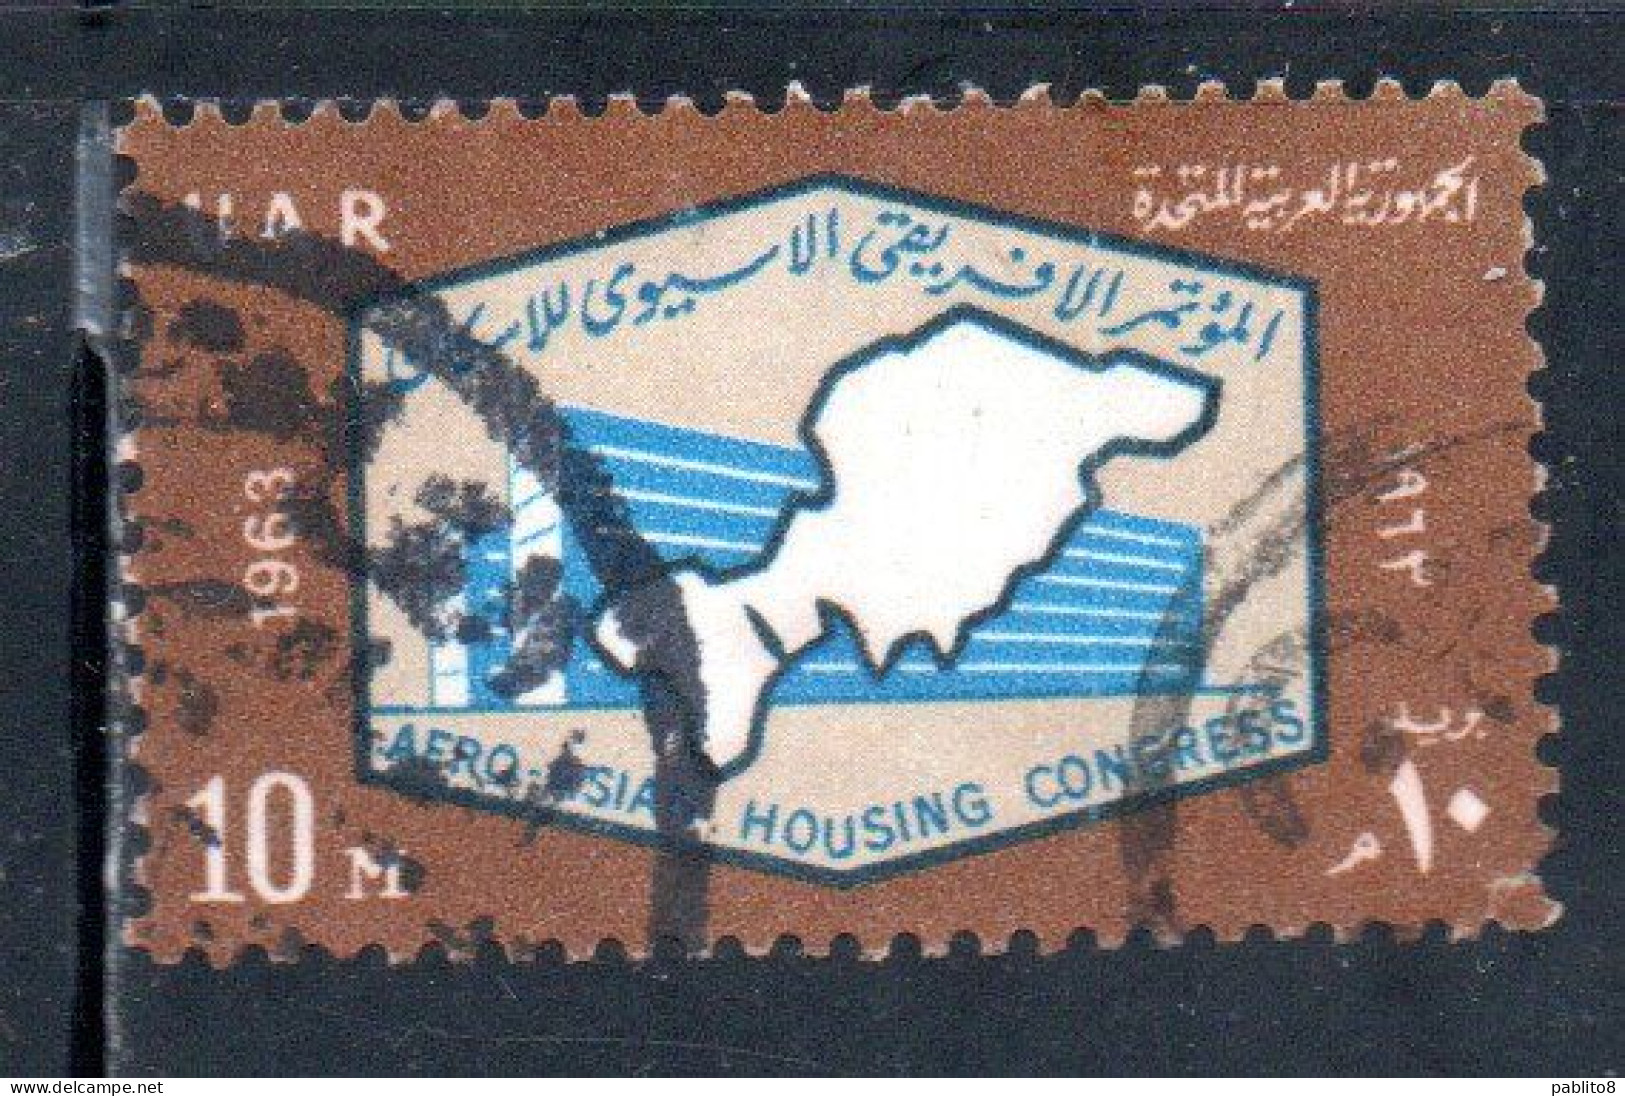 UAR EGYPT EGITTO 1963 AFRO-ASIAN HOUSING CONGRESS MODERN BUILDING AND MAP 10m  USED USATO OBLITERE' - Usados